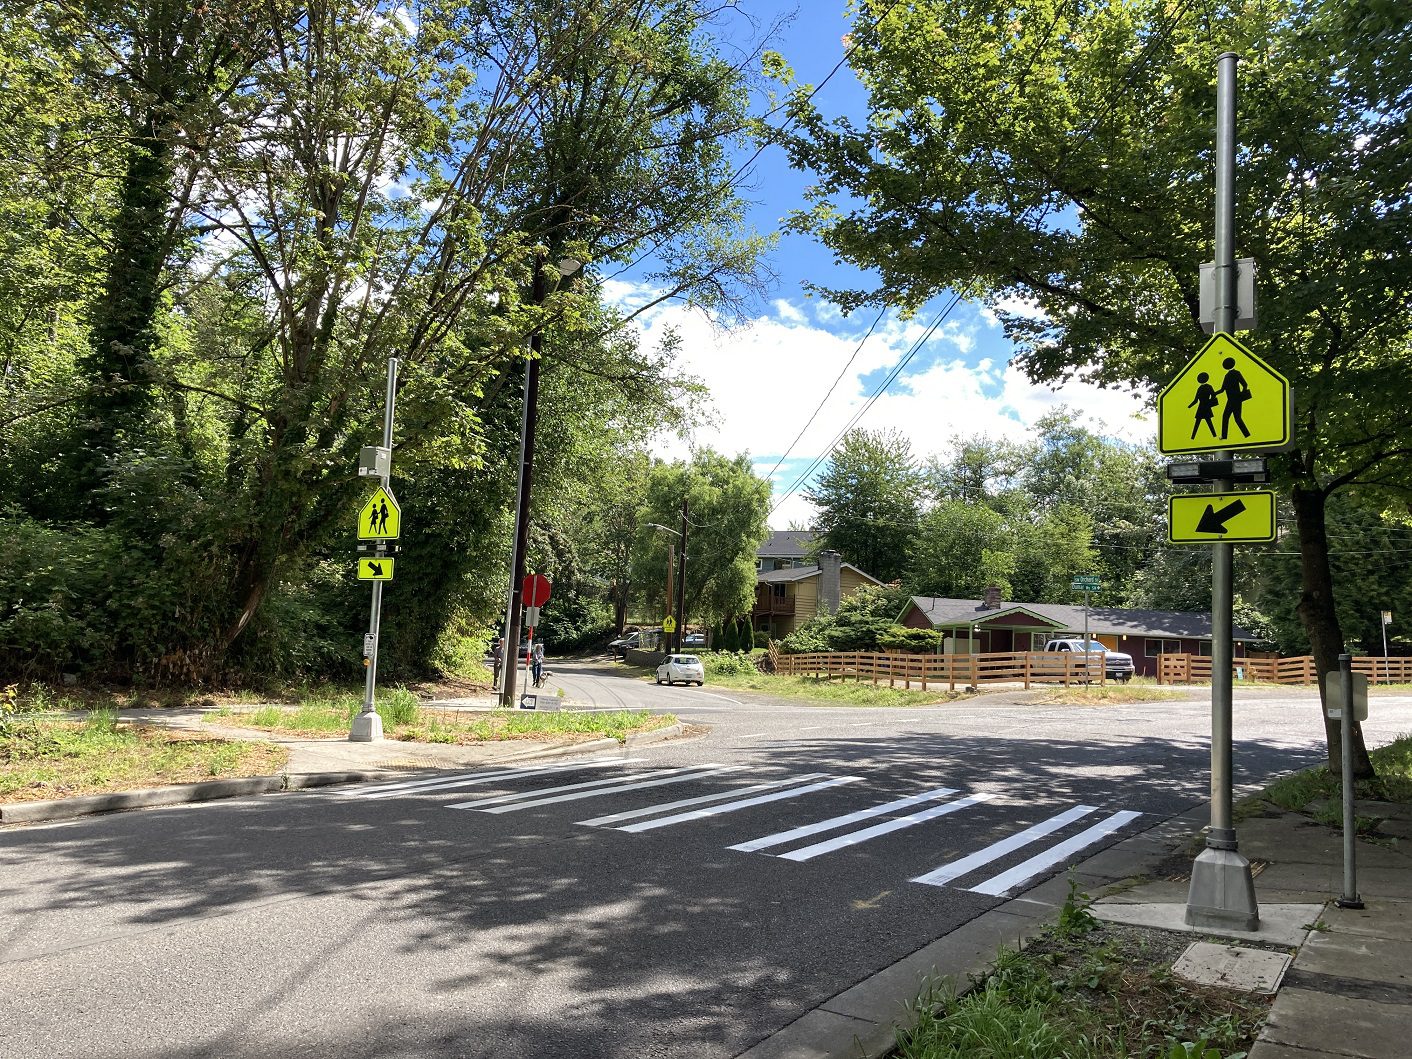 A newly-installed rectangular rapid flashing beacon at a crosswalk at Dumar Way SW and SW Orchard St. Mature trees, homes, and parked cars are present in the background.